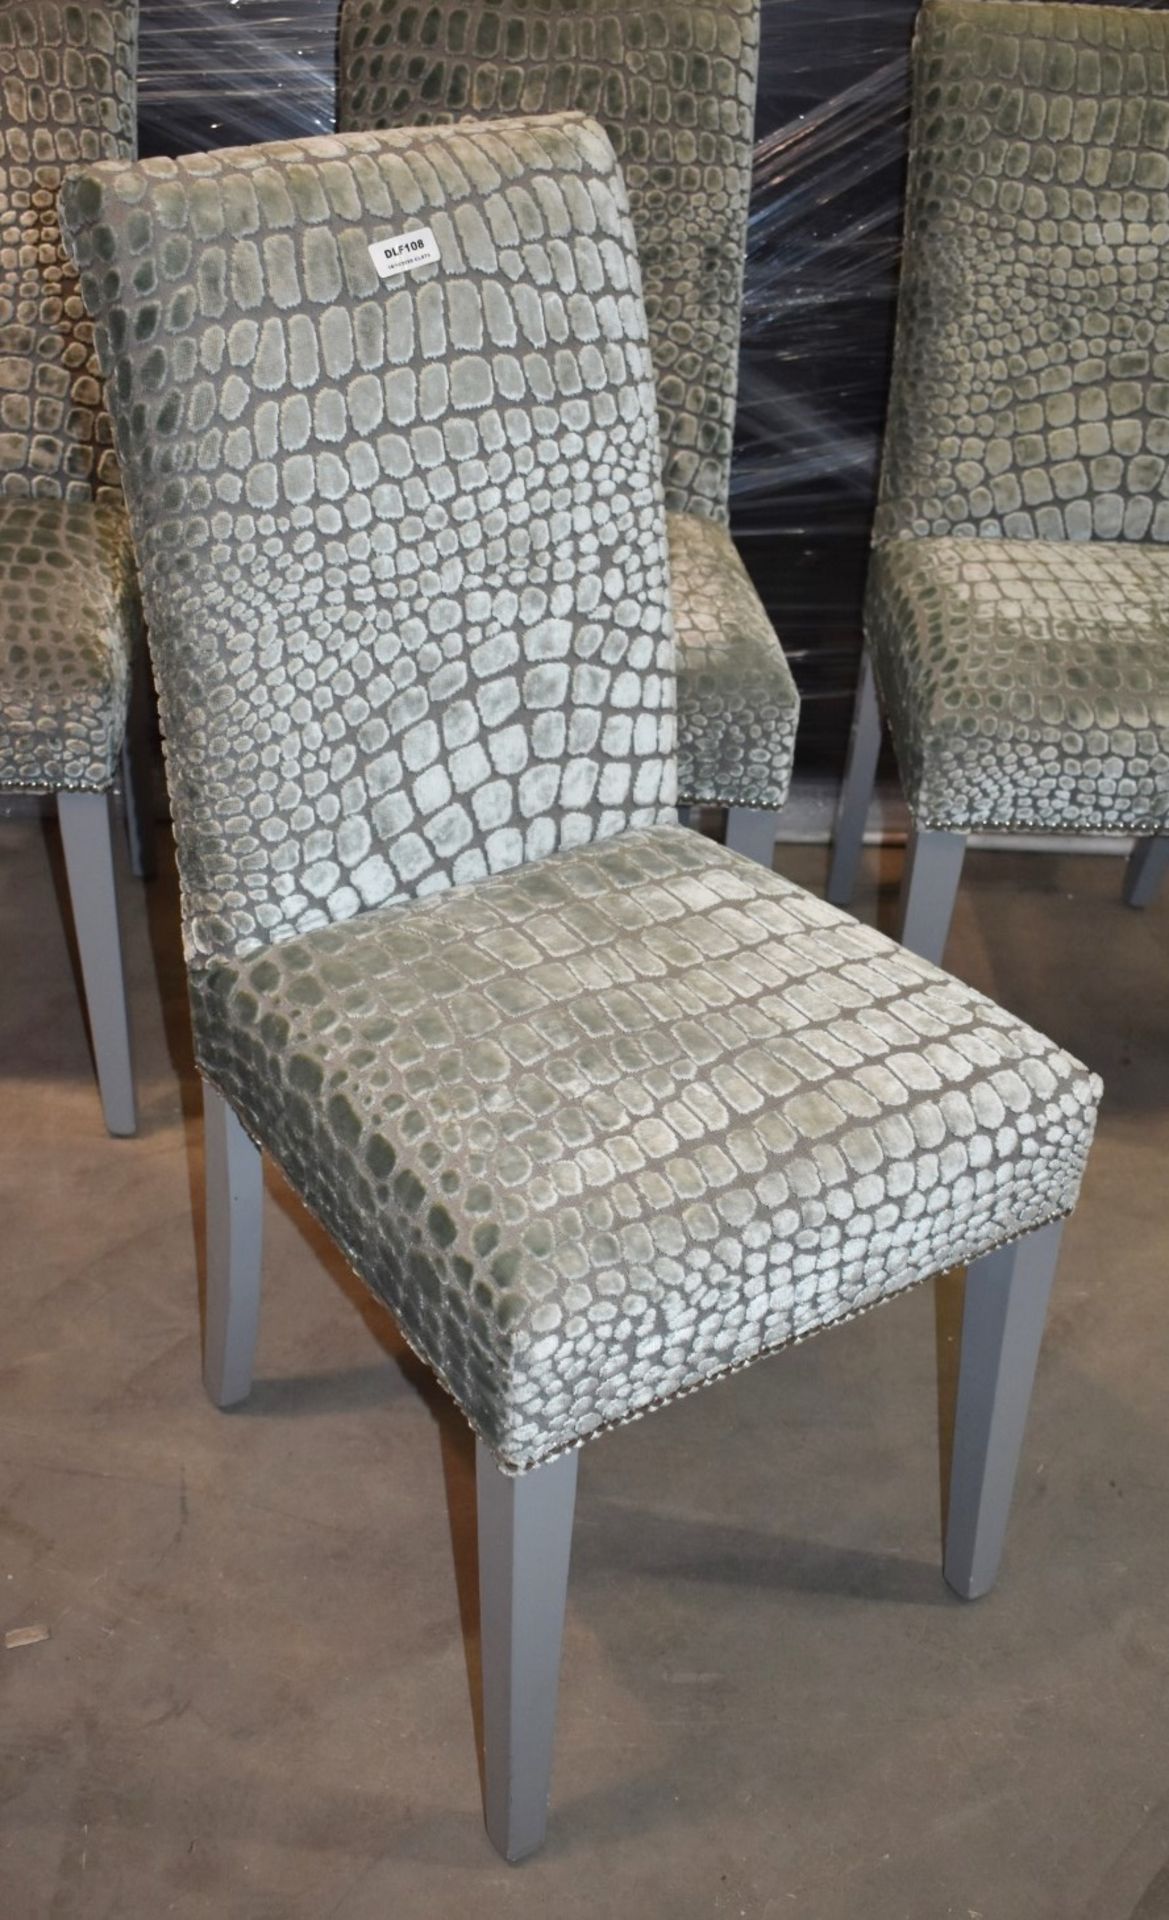 Set of Four Contemporary High Back Chairs With Reptile Skin Style Fabric Upholstery and Grey - Image 6 of 9